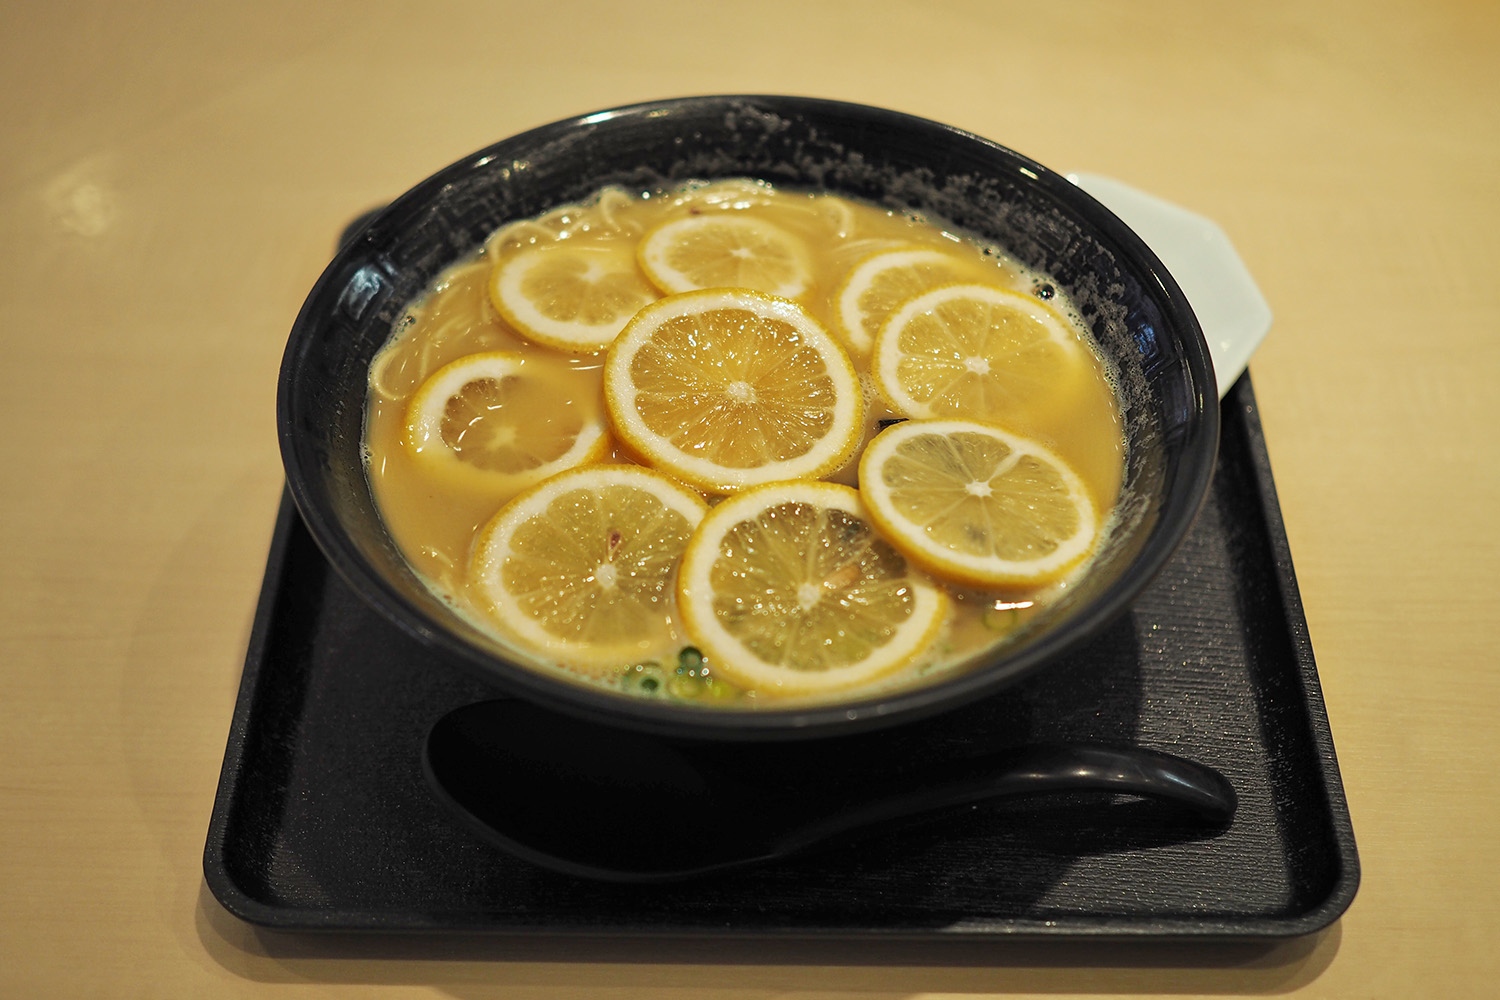 From Fruits to Bright Blue Broth: Unique Ramen in Tokyo